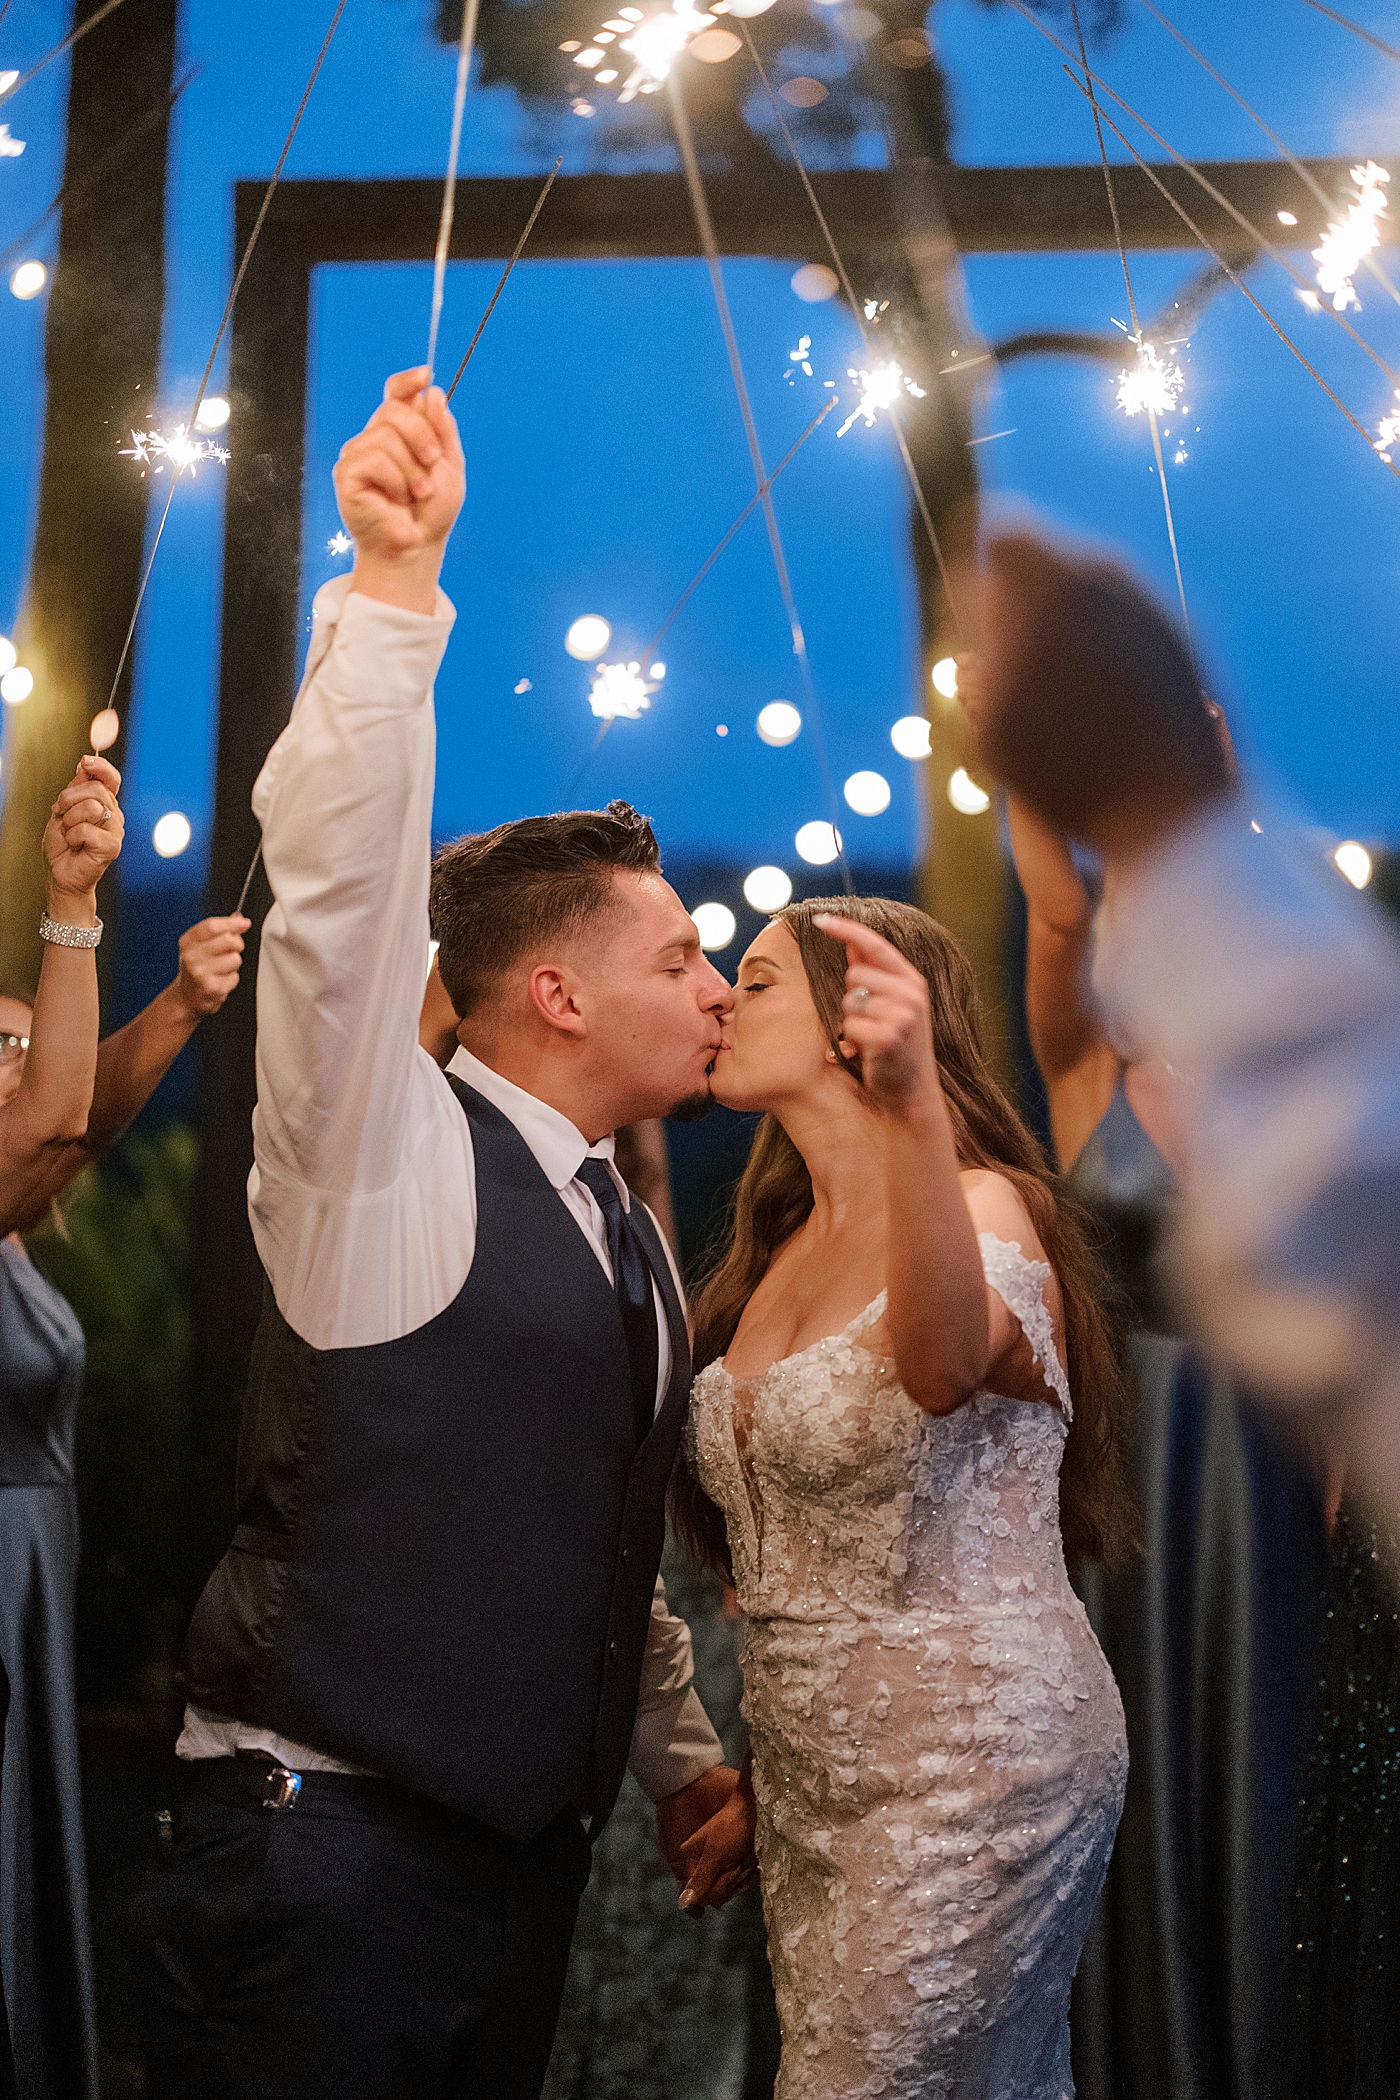 Bride and groom kiss holding sparkler during exit | Image by Hope Helmuth Photography 